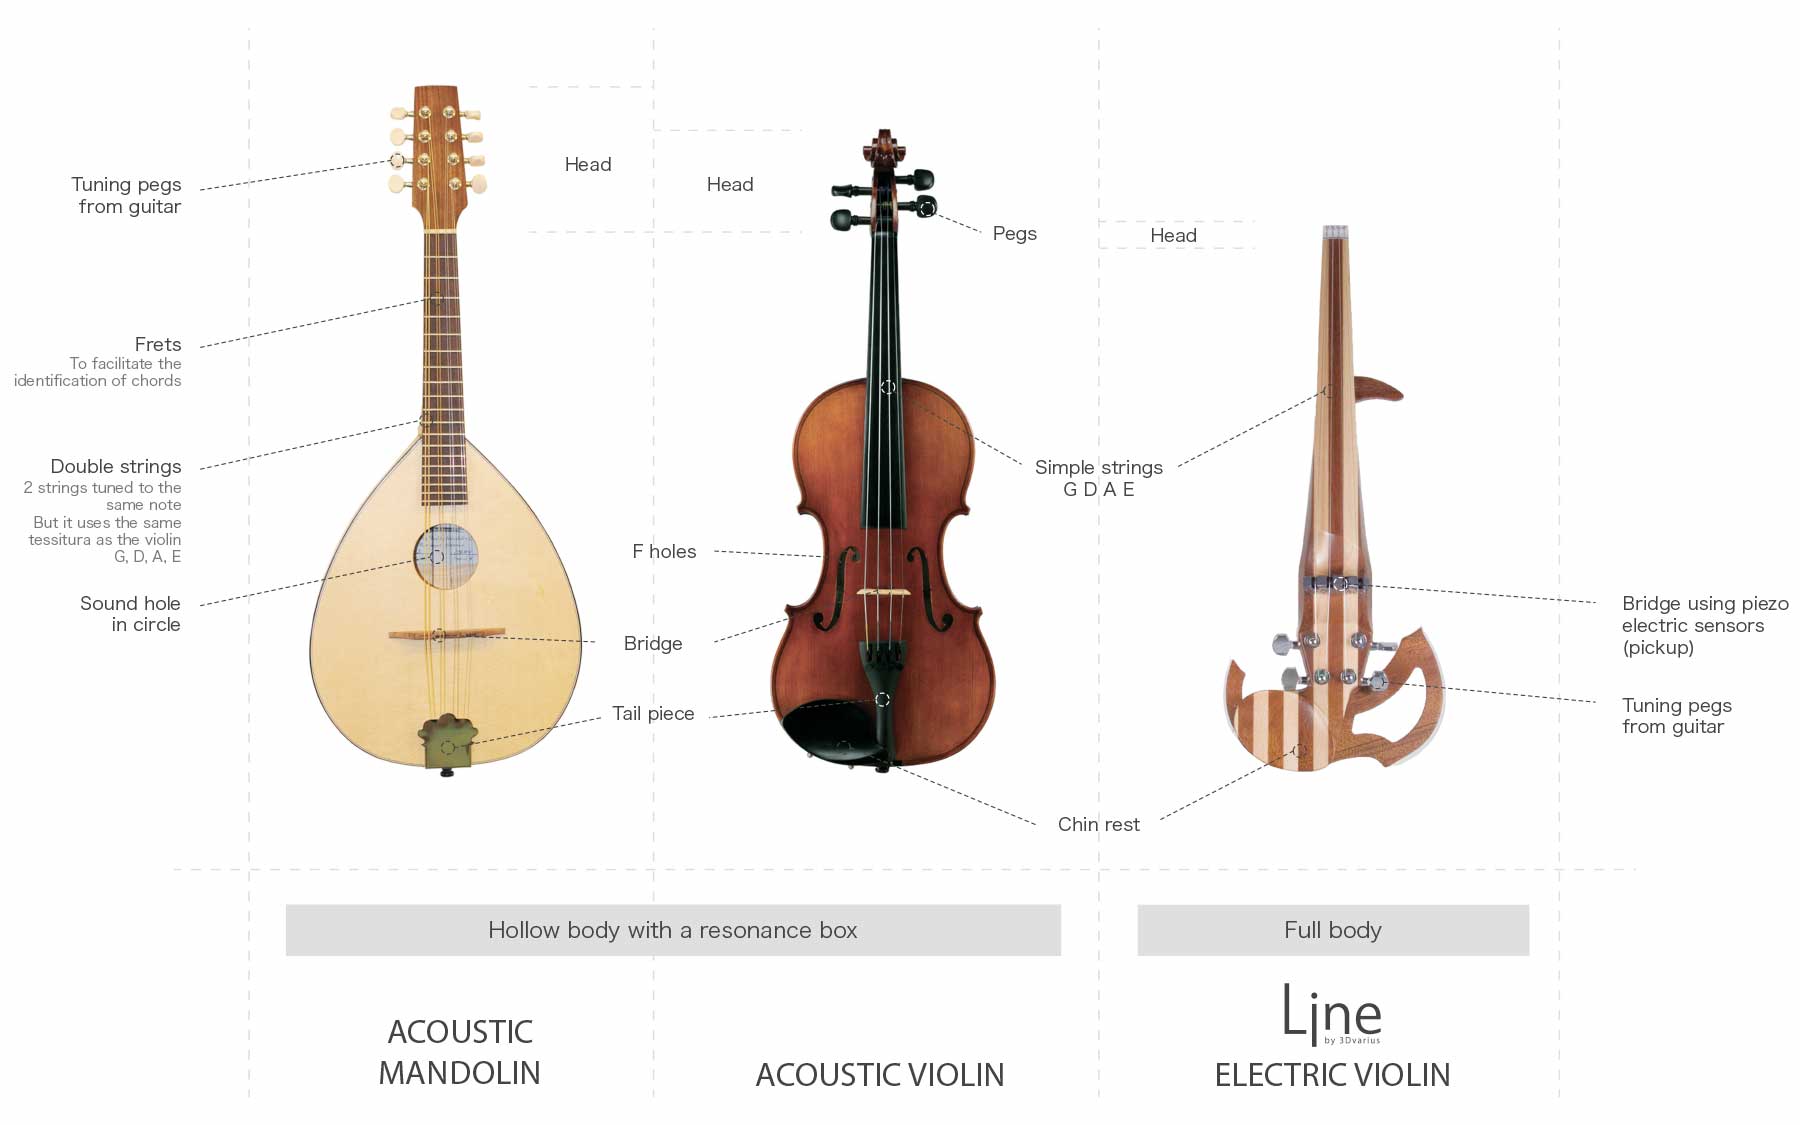 Differences and similarities between a violin and a mandolin